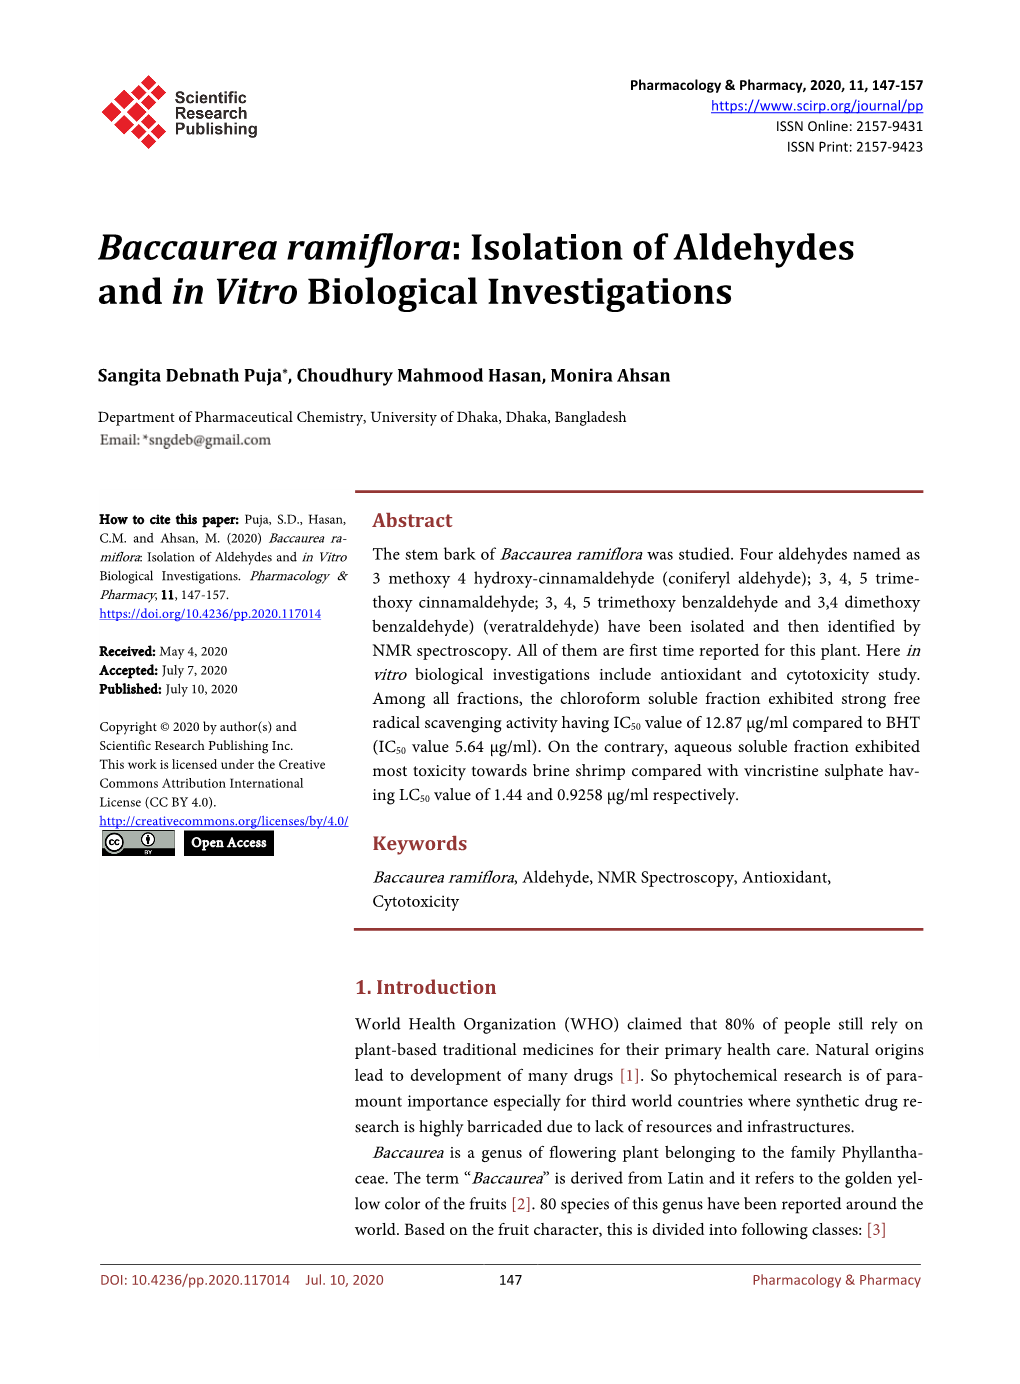 Baccaurea Ramiflora: Isolation of Aldehydes and in Vitro Biological Investigations